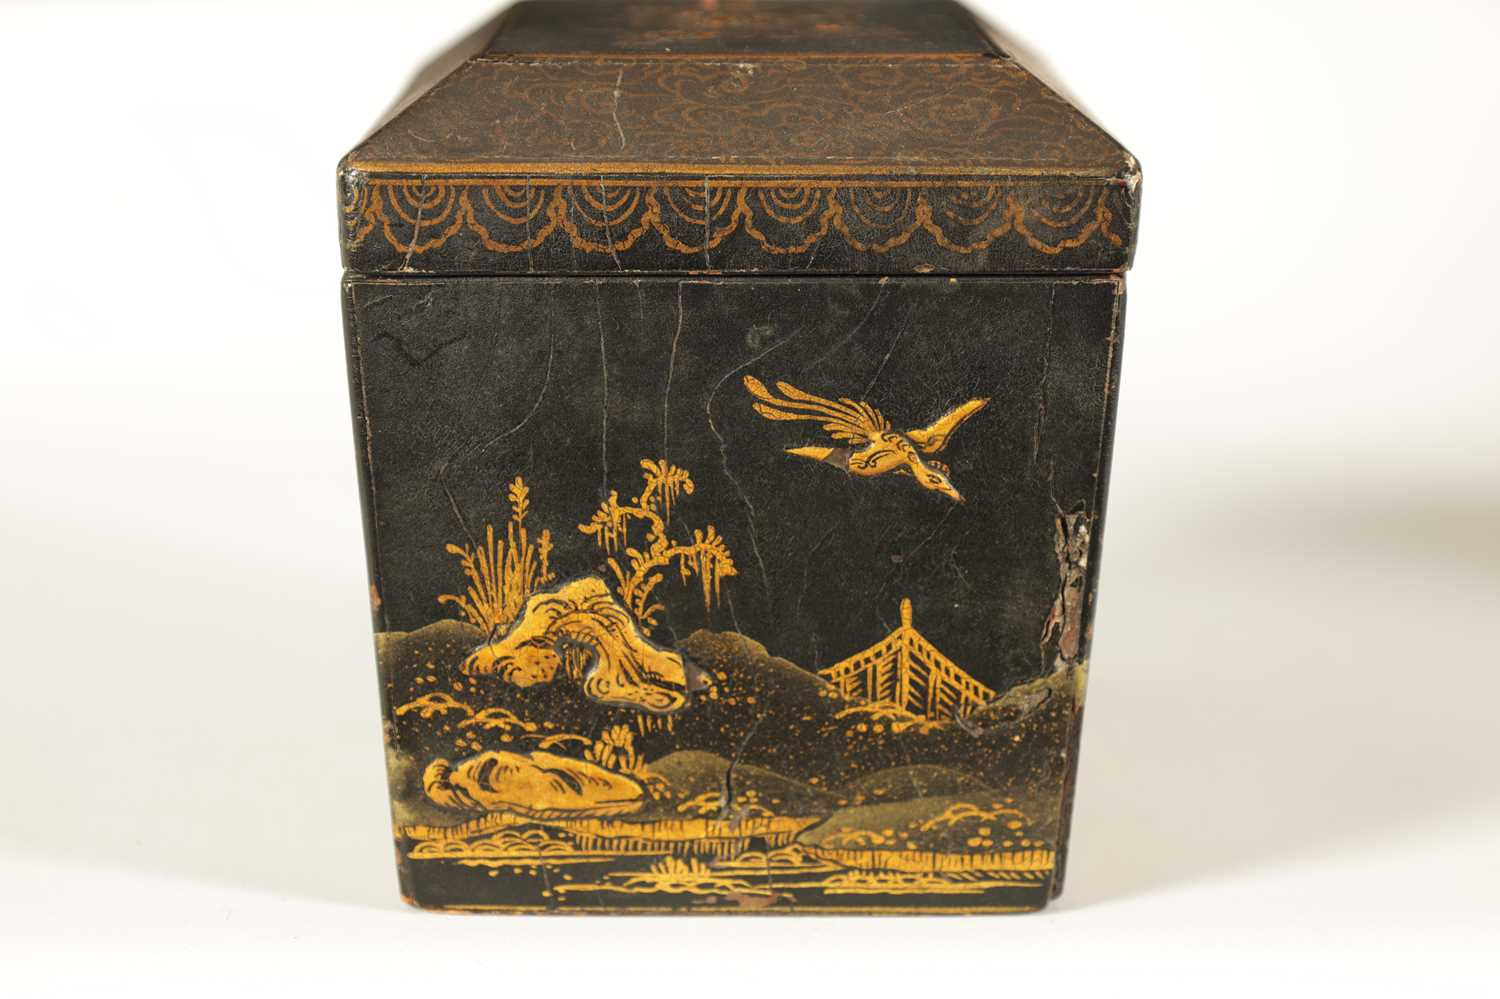 A LATE GEORGIAN BLACK LACQUER AND CHINOISERRIE SARCOPHAGUS TEA CADDY - Image 9 of 16